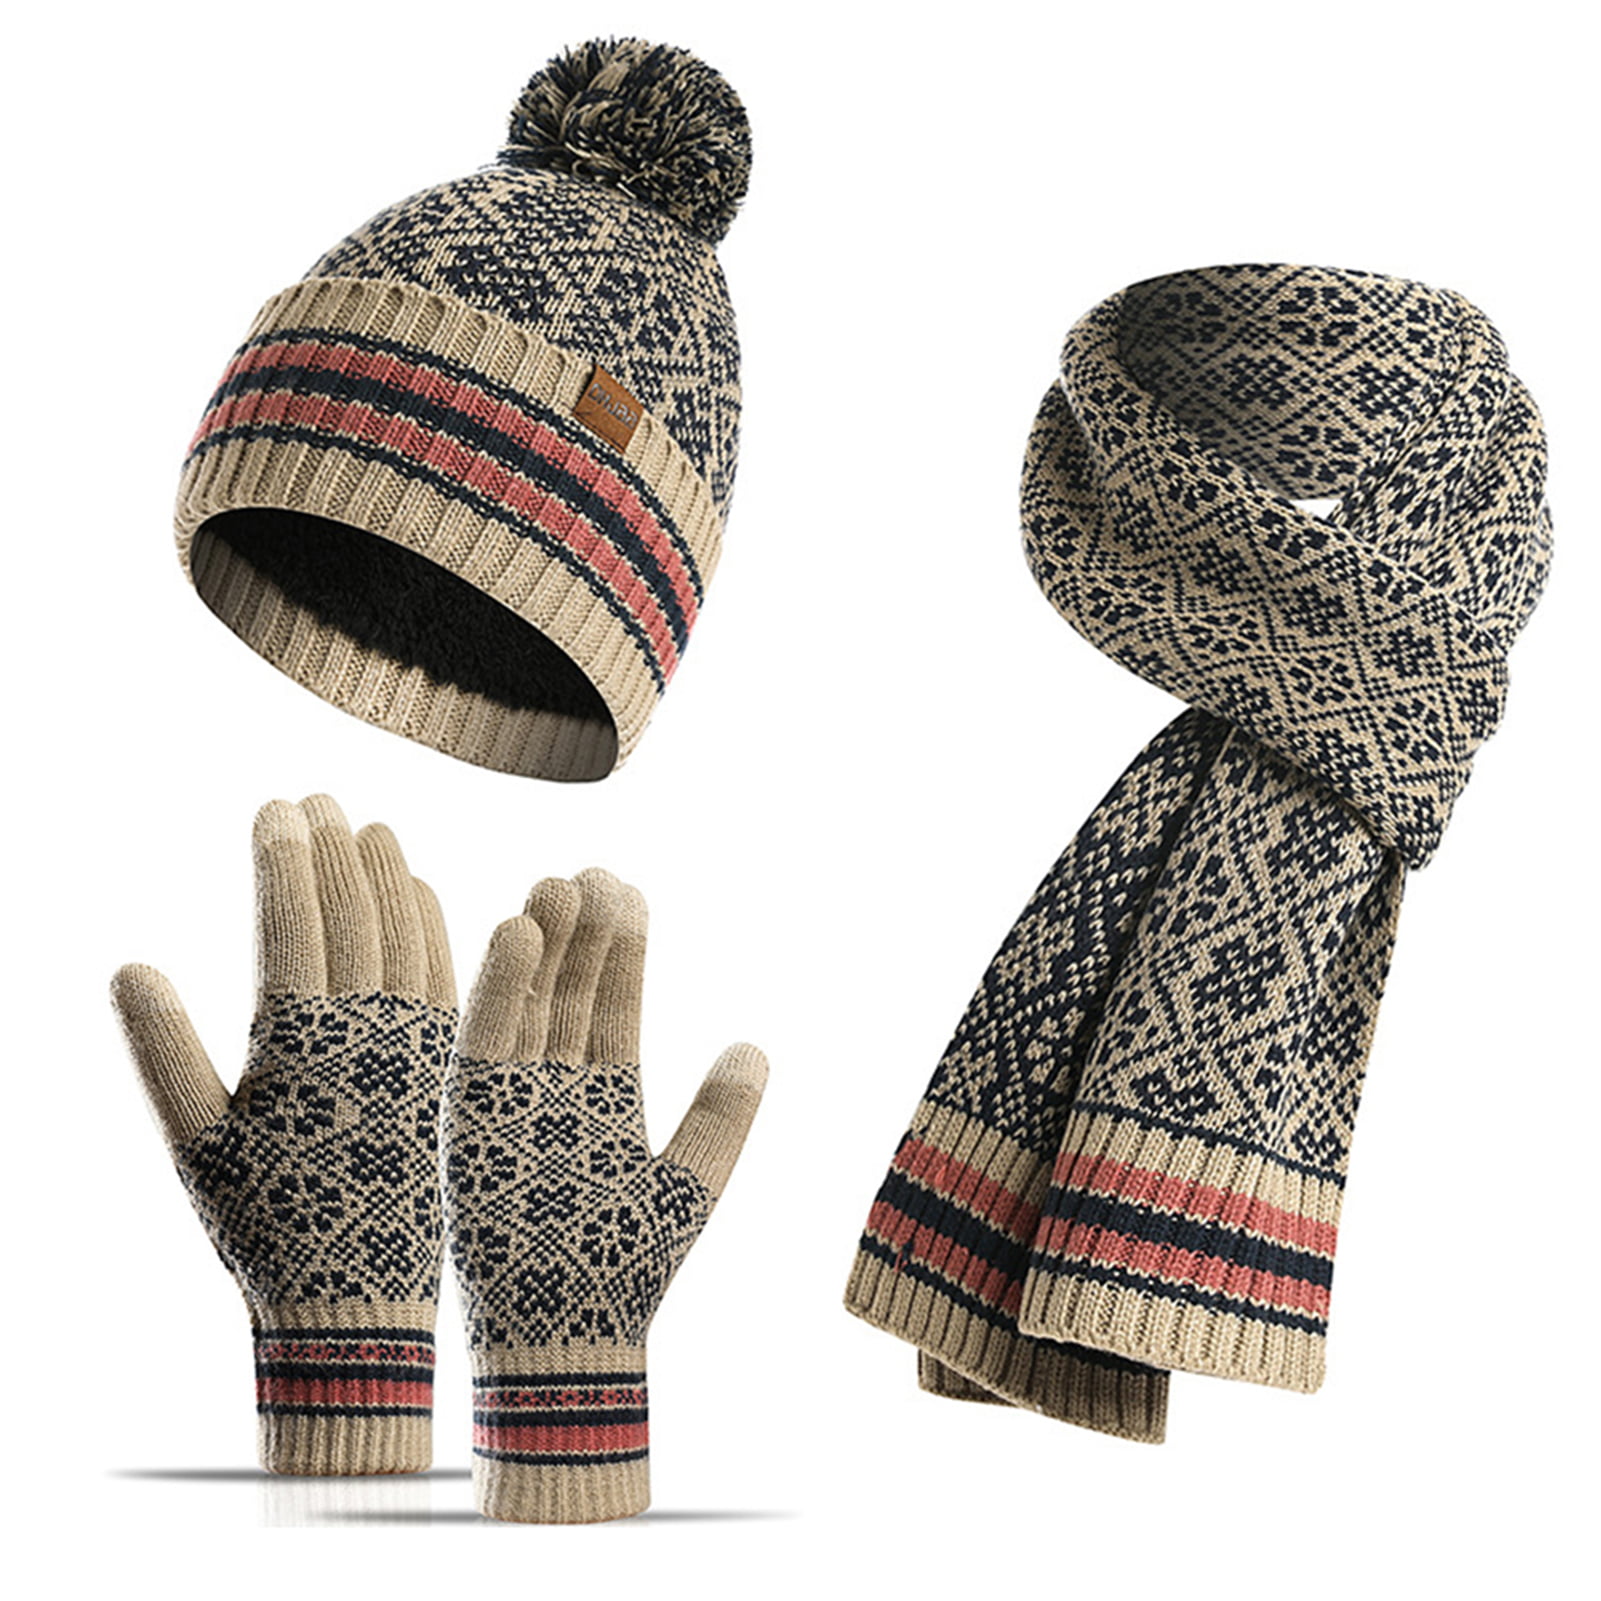 Thermal Knitted Hat and Scarf Gloves Set Chunky Fleece Lining Neck Warmer Touch Screen Gloves,Outdoor Sports Warm Set for Skiing/Hiking/Running/Driving 